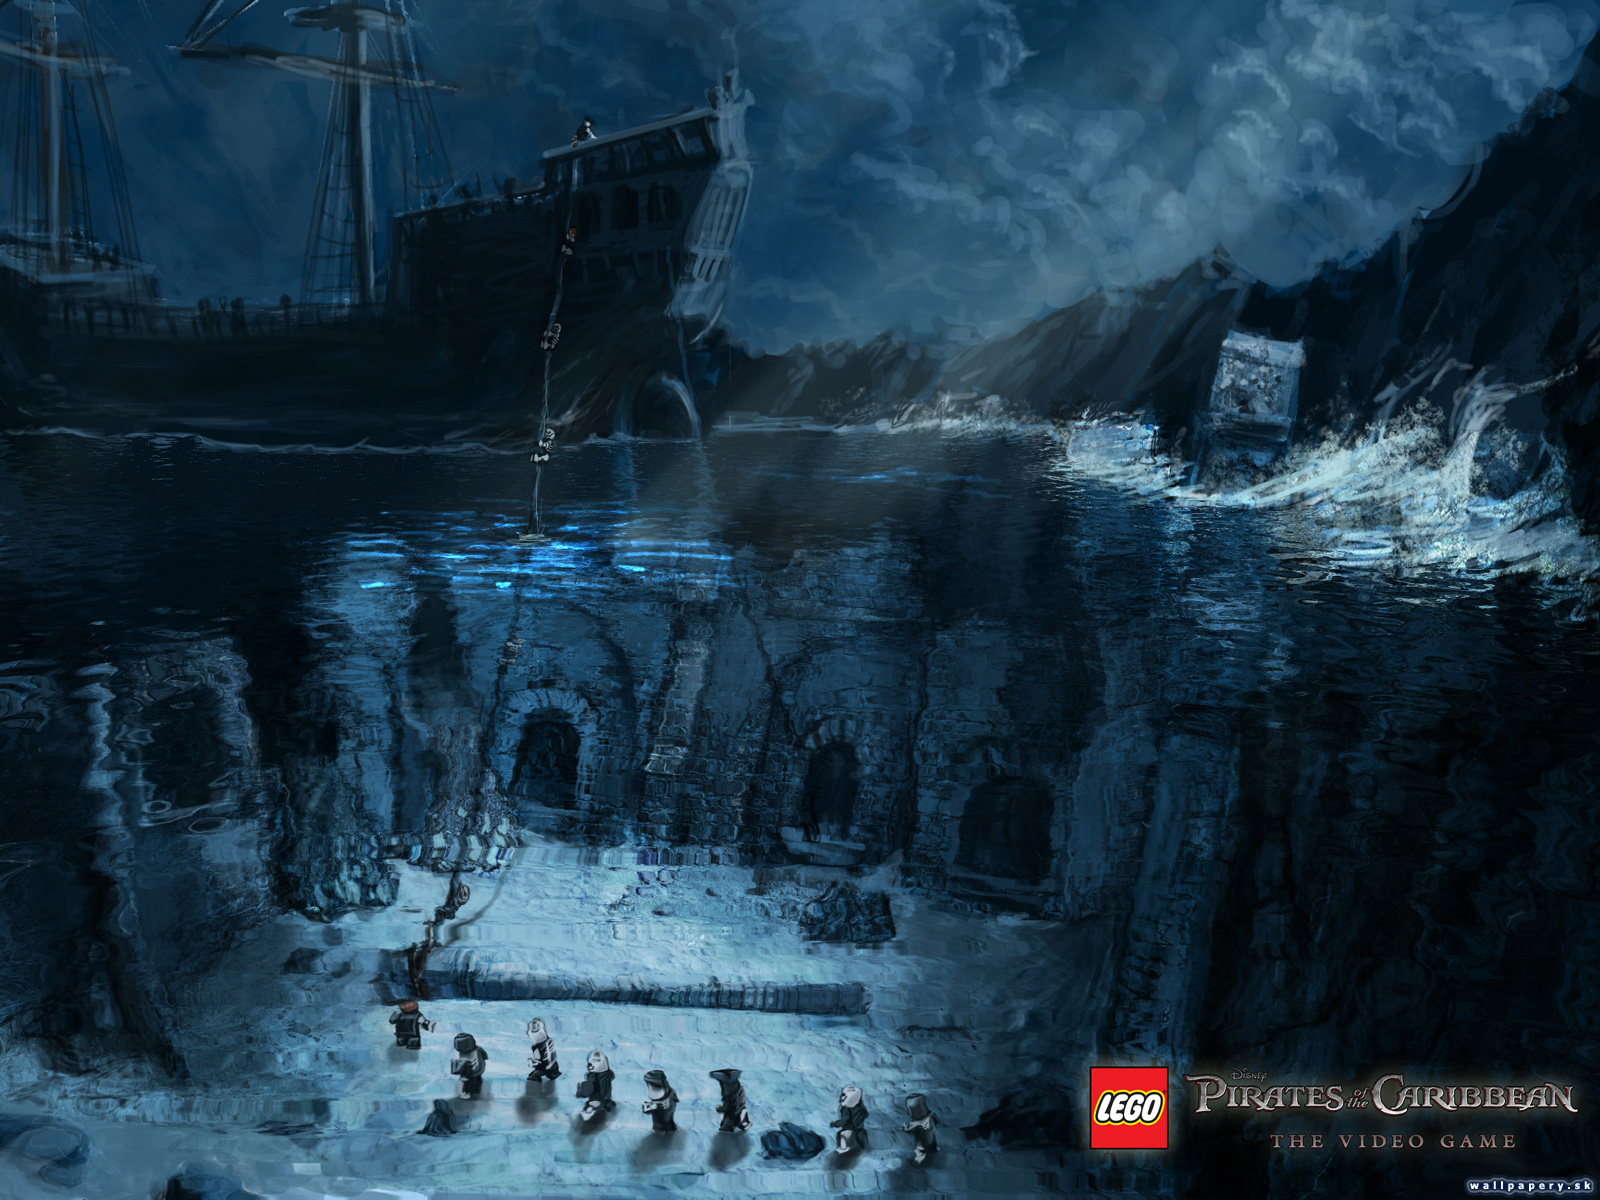 Lego Pirates of the Caribbean: The Video Game - wallpaper 3